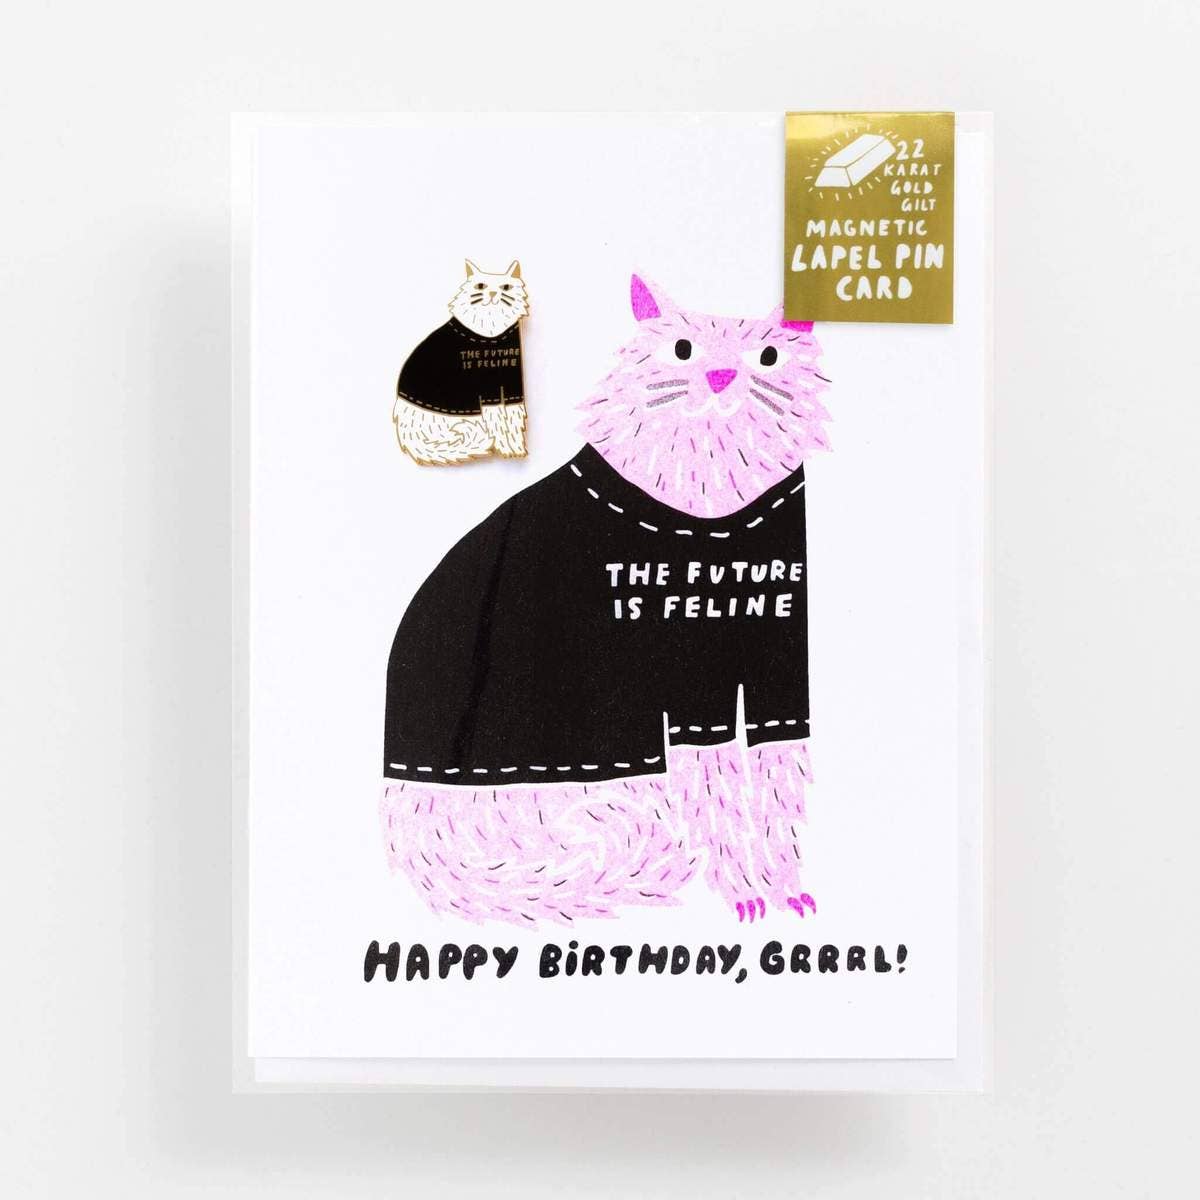 The Future Is Feline Pin and Happy Birthday Grrrl Card